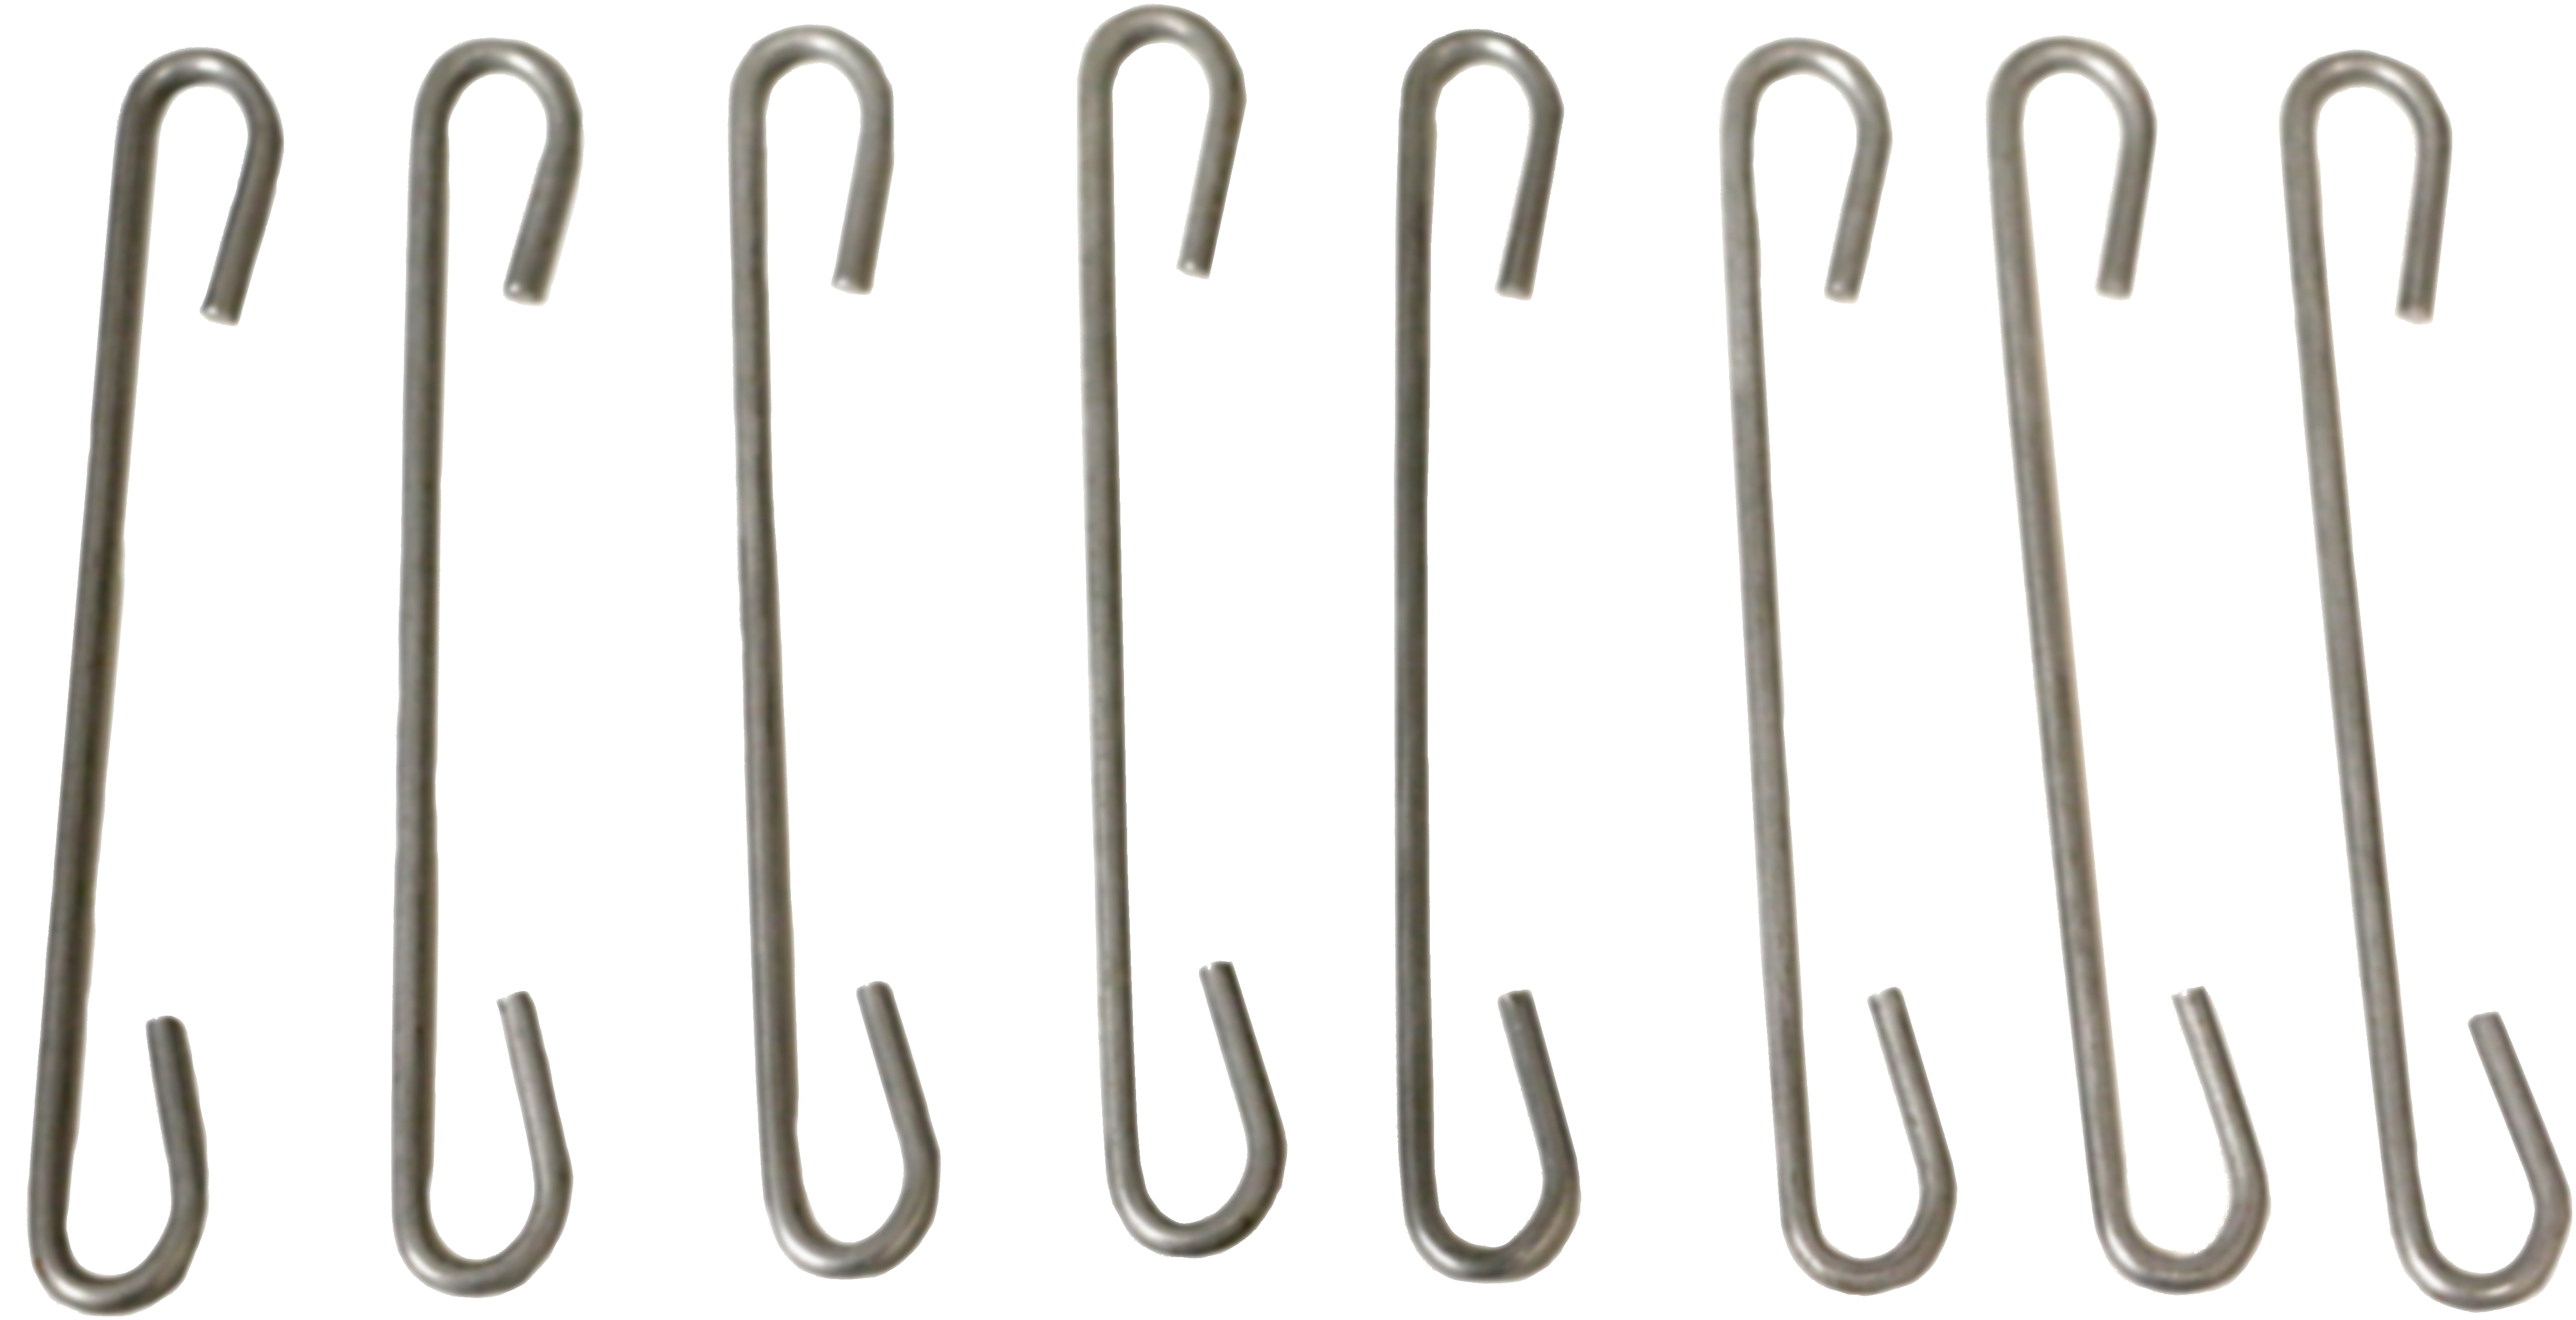 attachment hooks for sofa beds